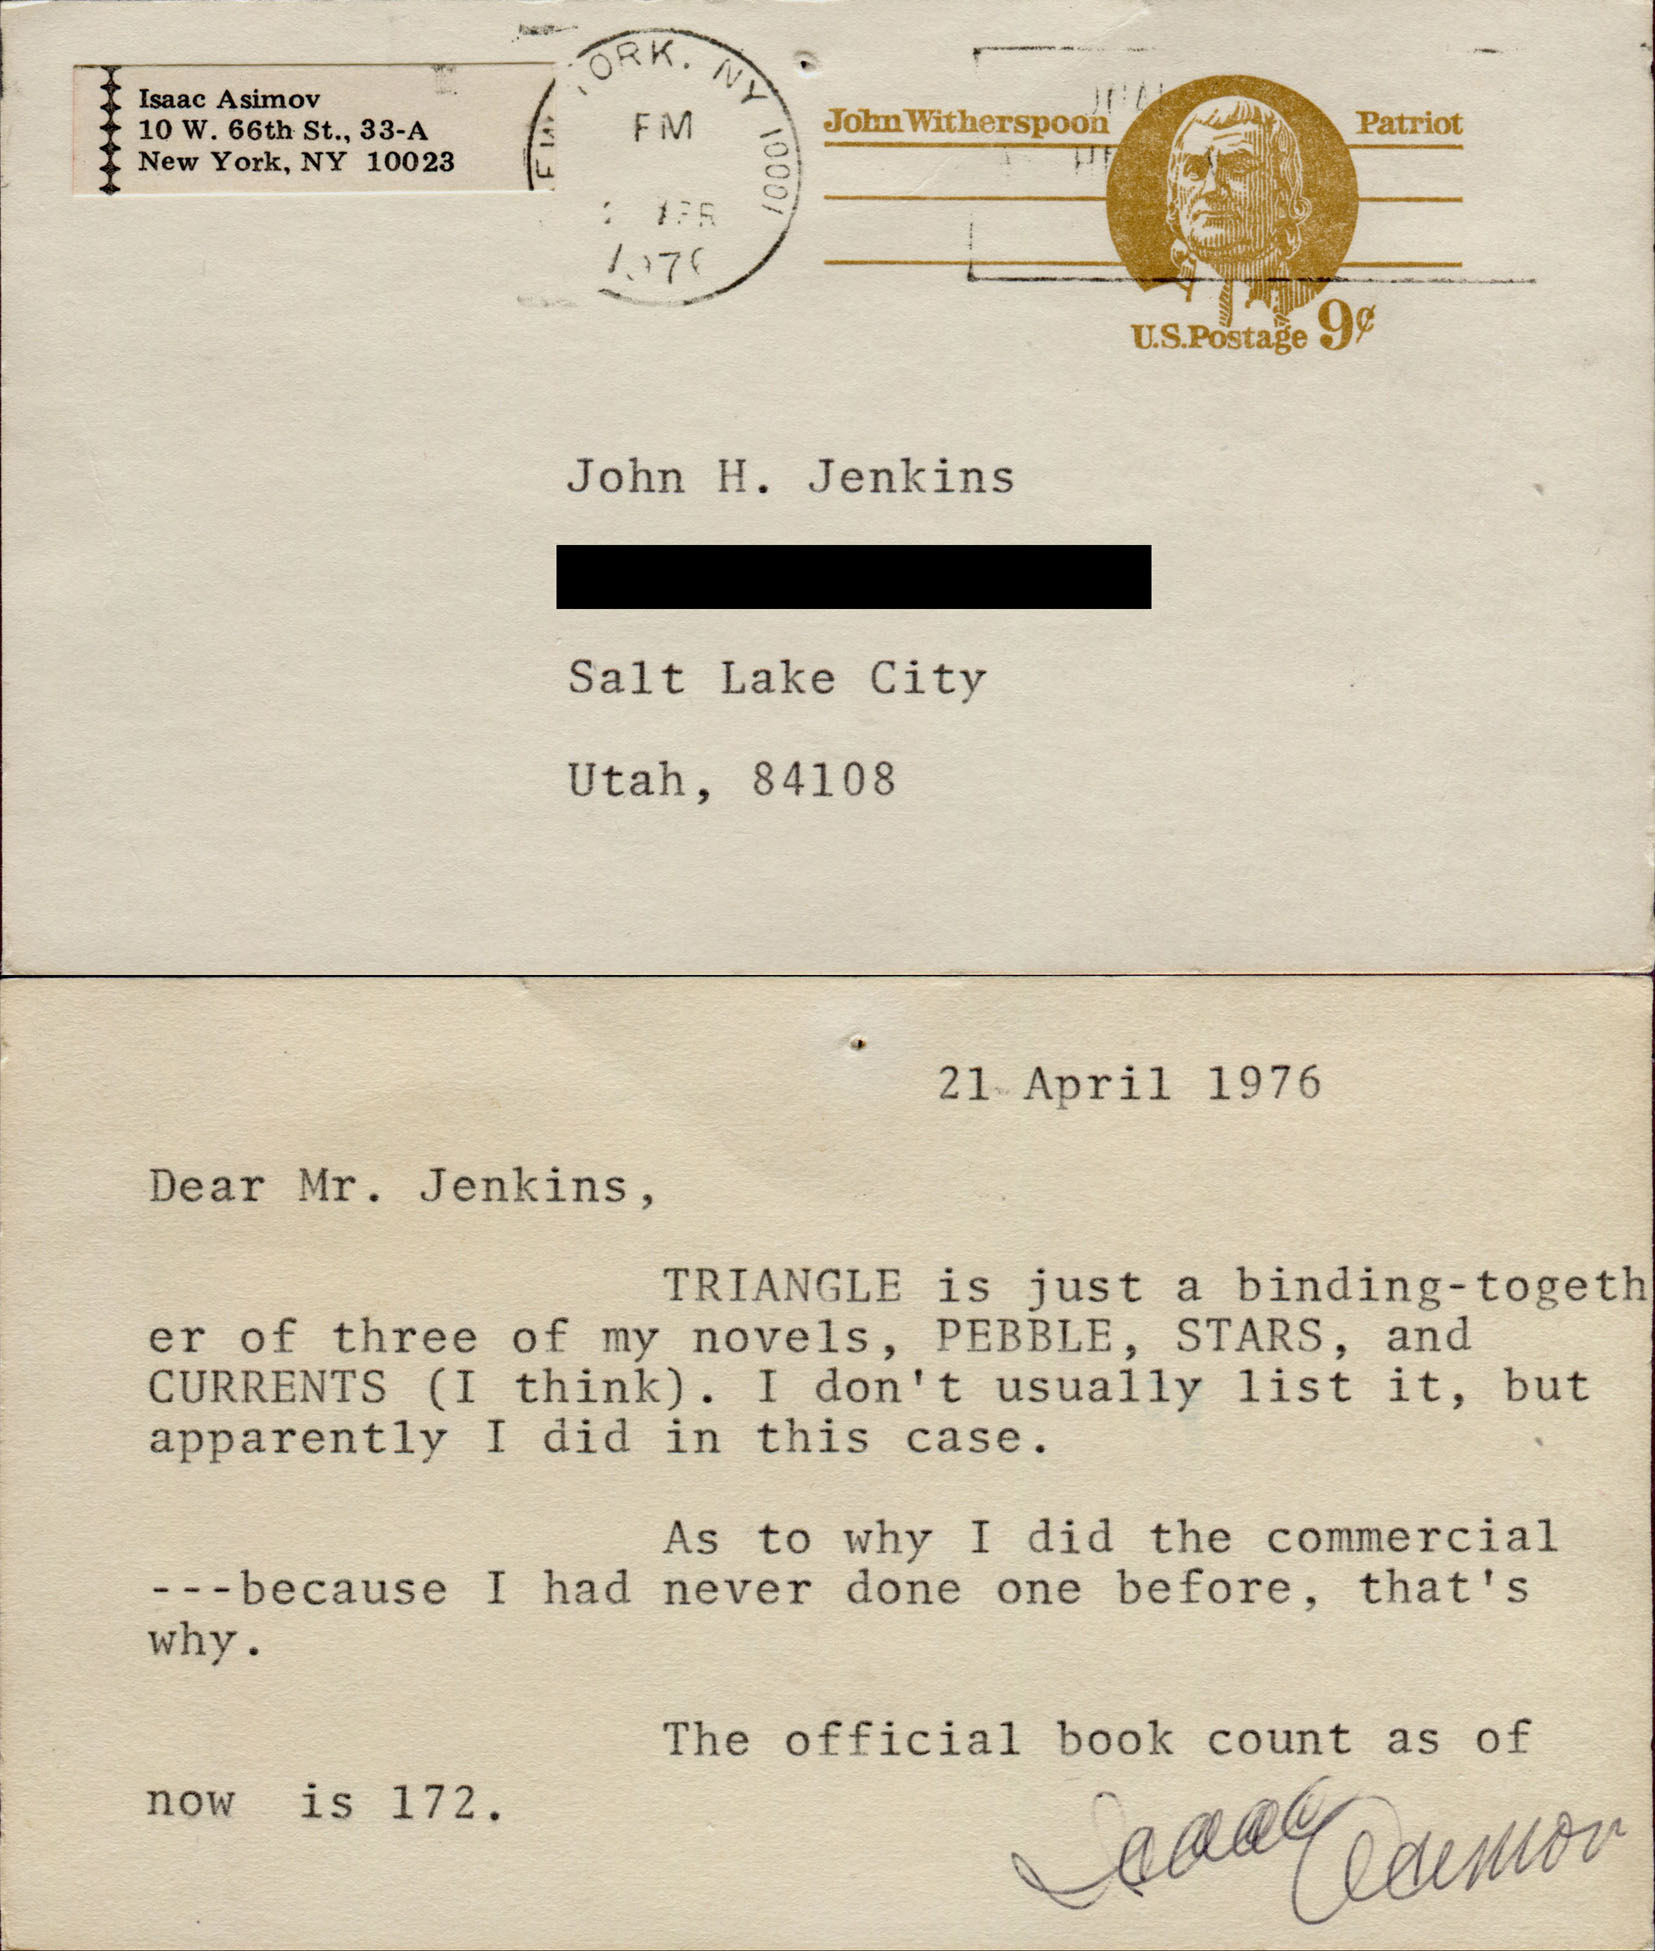 21 April 1976. Dear Mr. Jenkins, TRIANGLE is just a binding-together of three of my novels, PEBBLE, STARS, and CURRENTS (I think). I don't usually list it, but apparently I did in this case. As to why I did the commercial---because I had never done one before, that's why. The official book count as of now is 172. Isaac Asimov